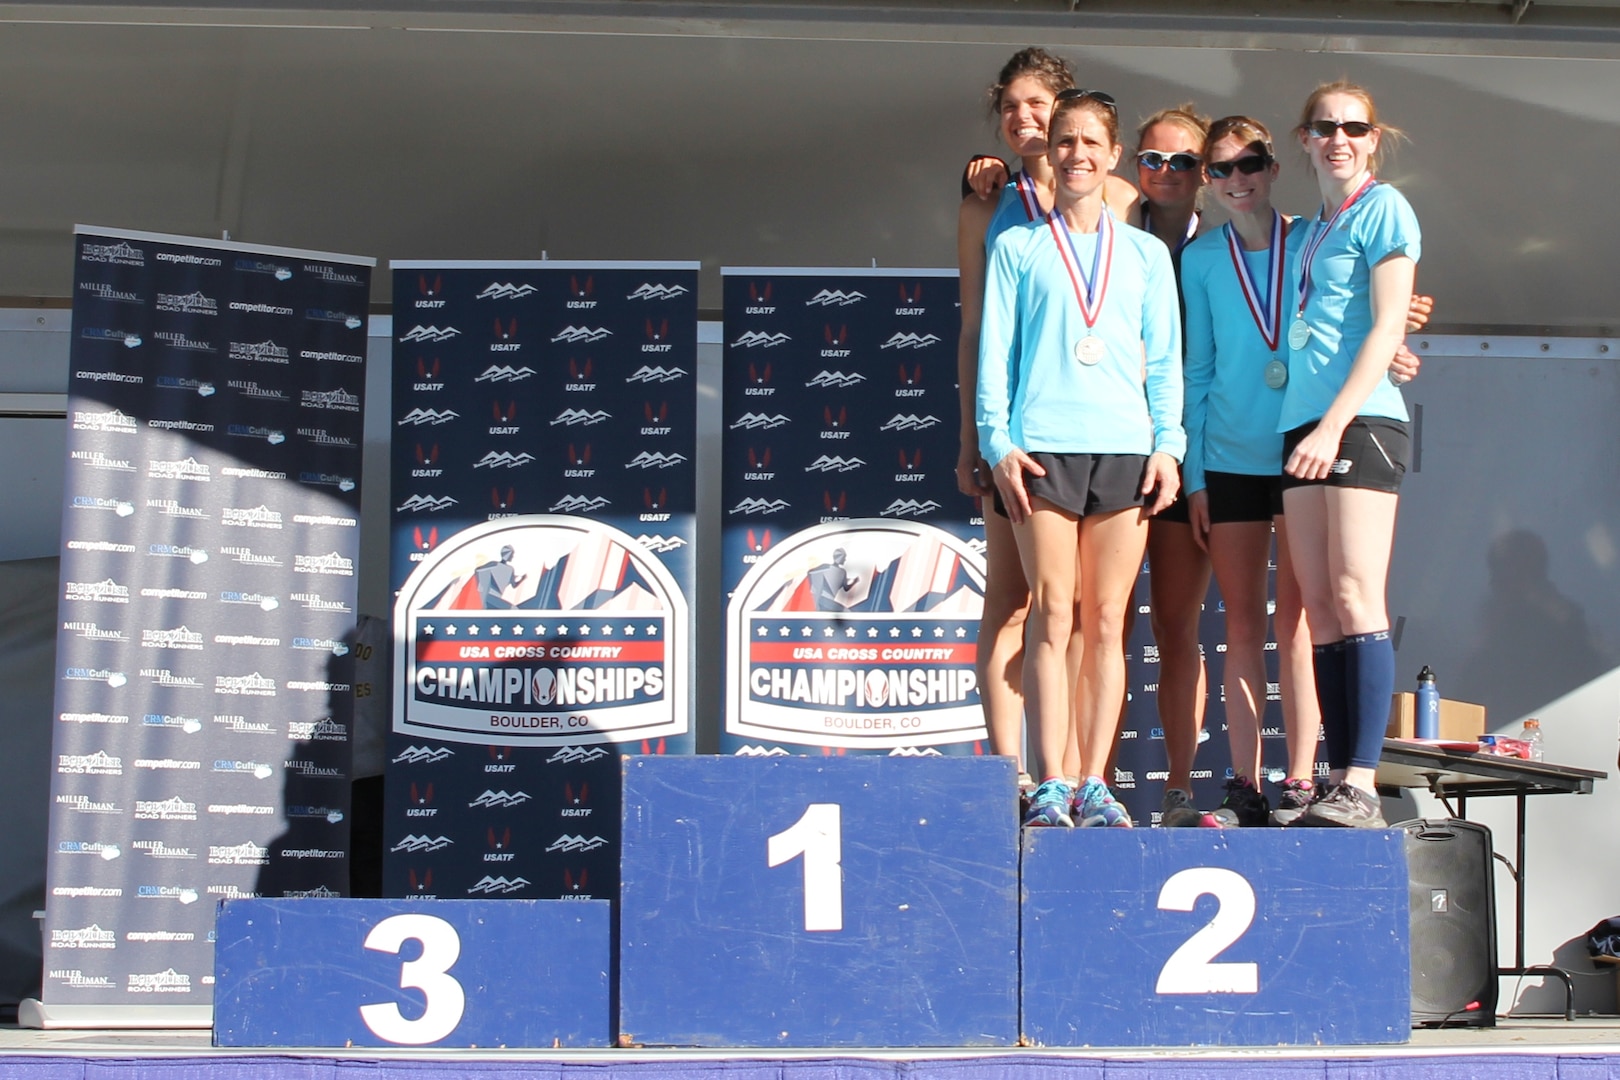 Air Force Women capture silver at the 2015 Armed Forces Cross Country Championship held conducted in conjunction with the USA Track and Field Winter National Cross Country Championship in Boulder, Colo. on Feb. 7

Air Force Team Members:  1st Lt. Katherine Ward, AF WCAP, Colorado Springs, Colo.; Lt. Col. Brenda Schrank, Joint Base Andrews AFB, Md.; 2nd lt. Magin Day, Ramstein AFB, Germany; Maj. Charlotte Portlock, U.S. Air Force Academy, Colo.; 2nd lt. Samantha Morrison, AF WCAP, Colorado Springs, Colo.; Capt. Cindy Dawson, U.S. Air Force Academy, Colo.
